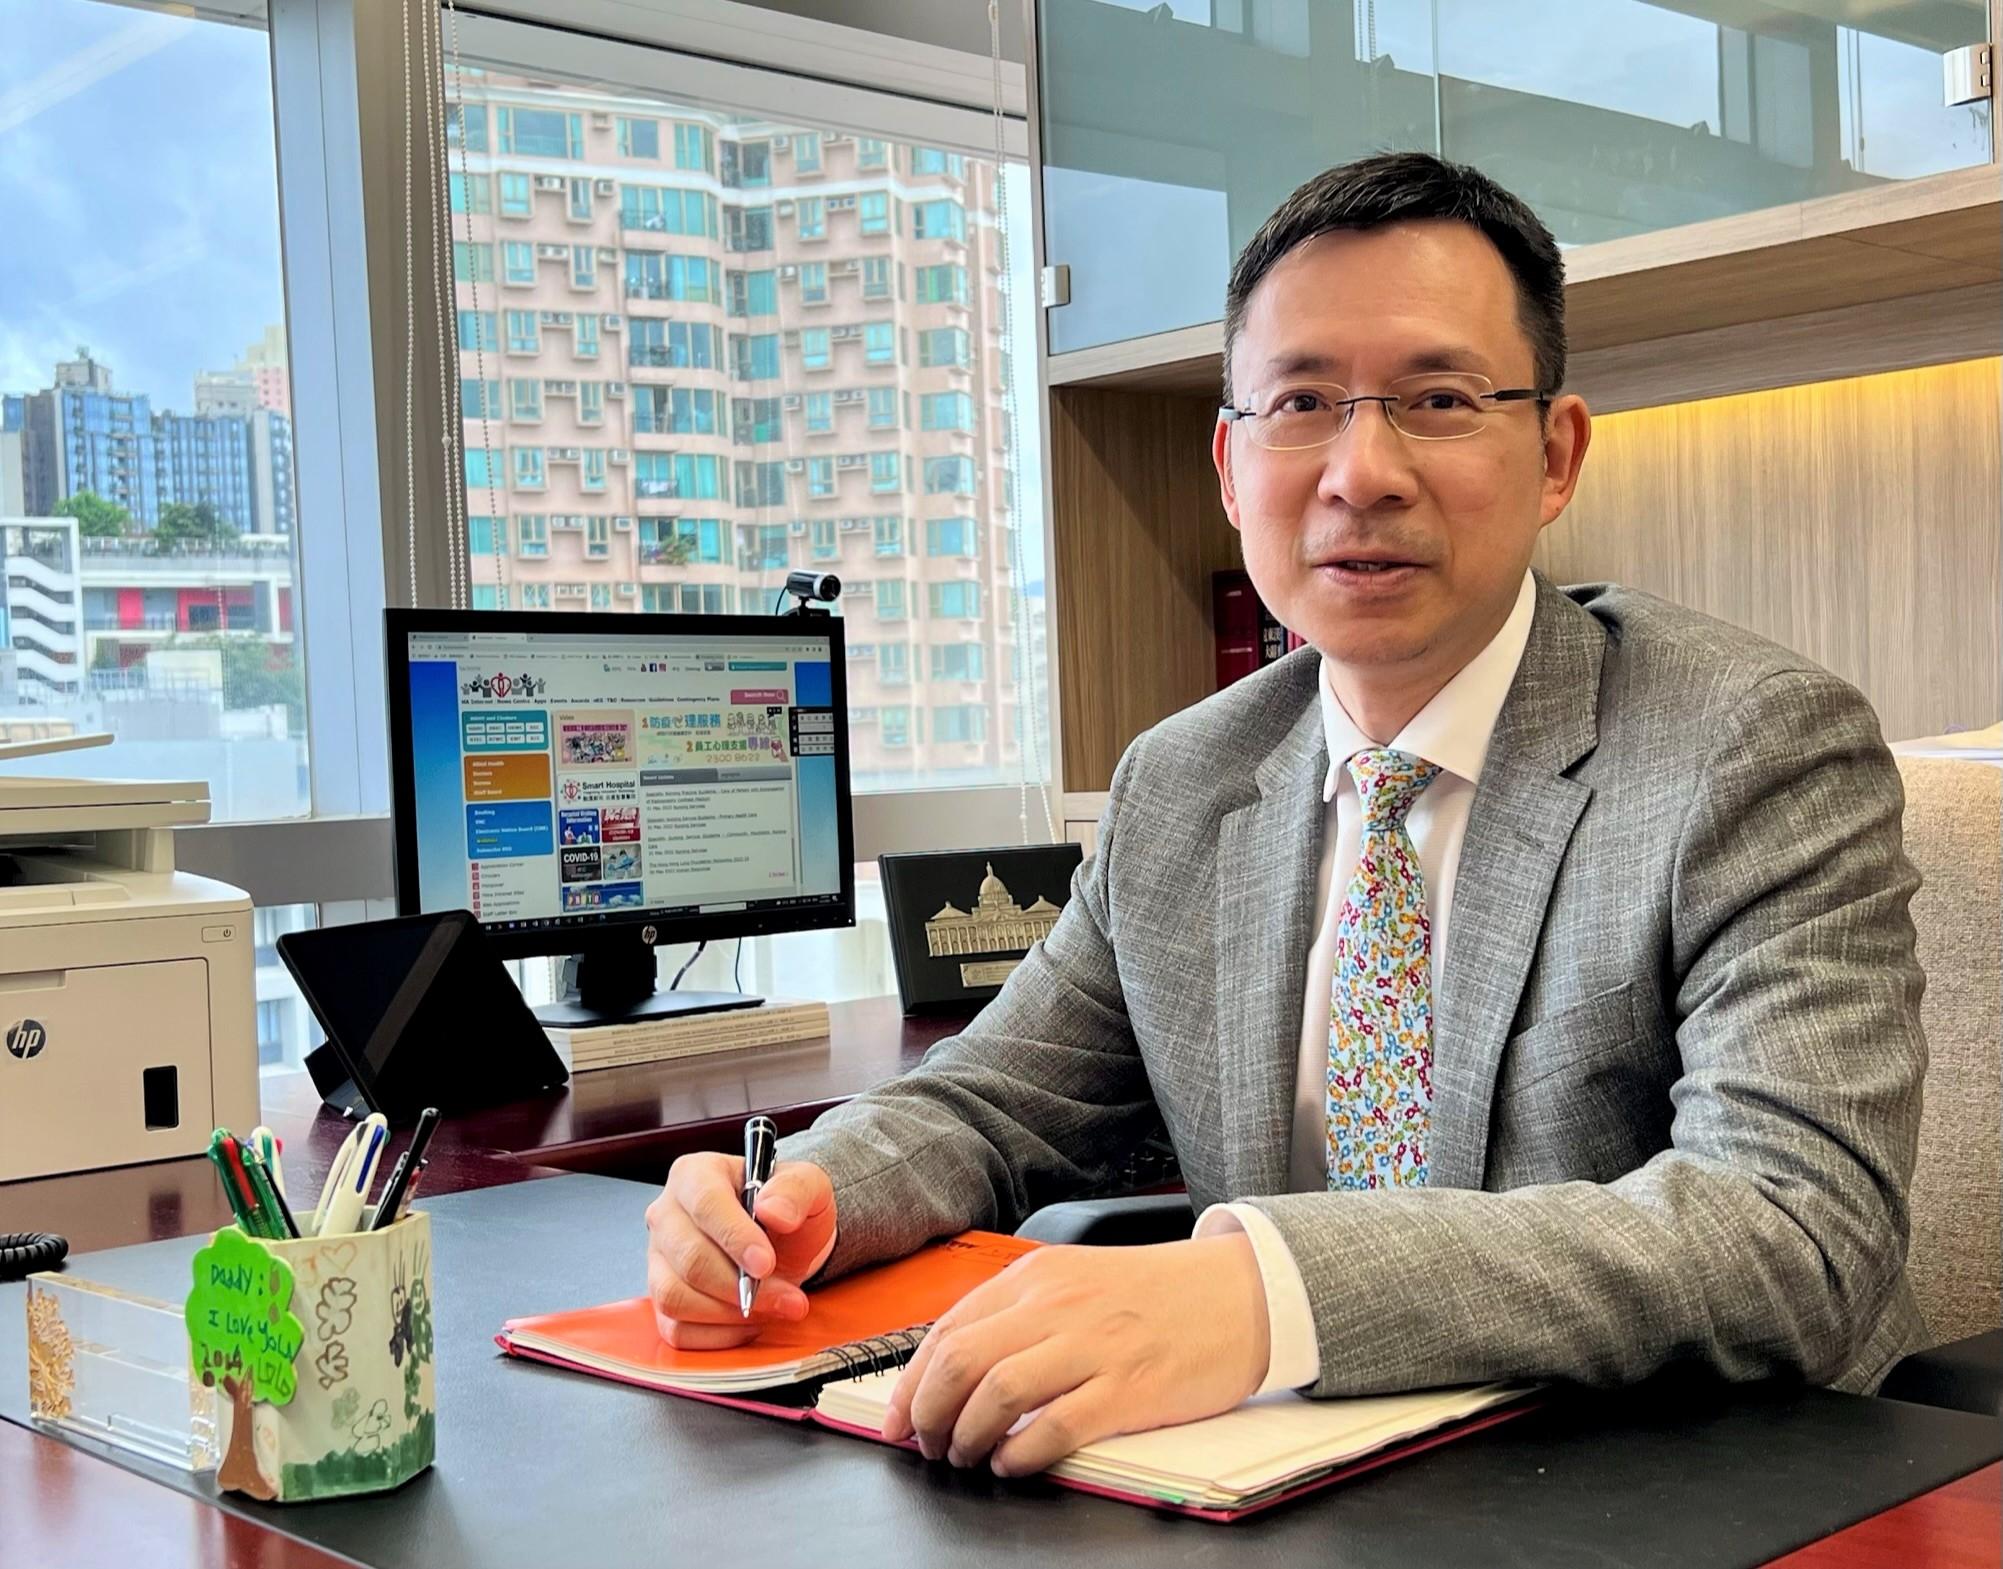 The Hospital Authority announced today (June 23) that Mr Andy Lau will be appointed as the Head of Corporate Services with effect from September 5, succeeding Ms Margaret Cheung upon her retirement.